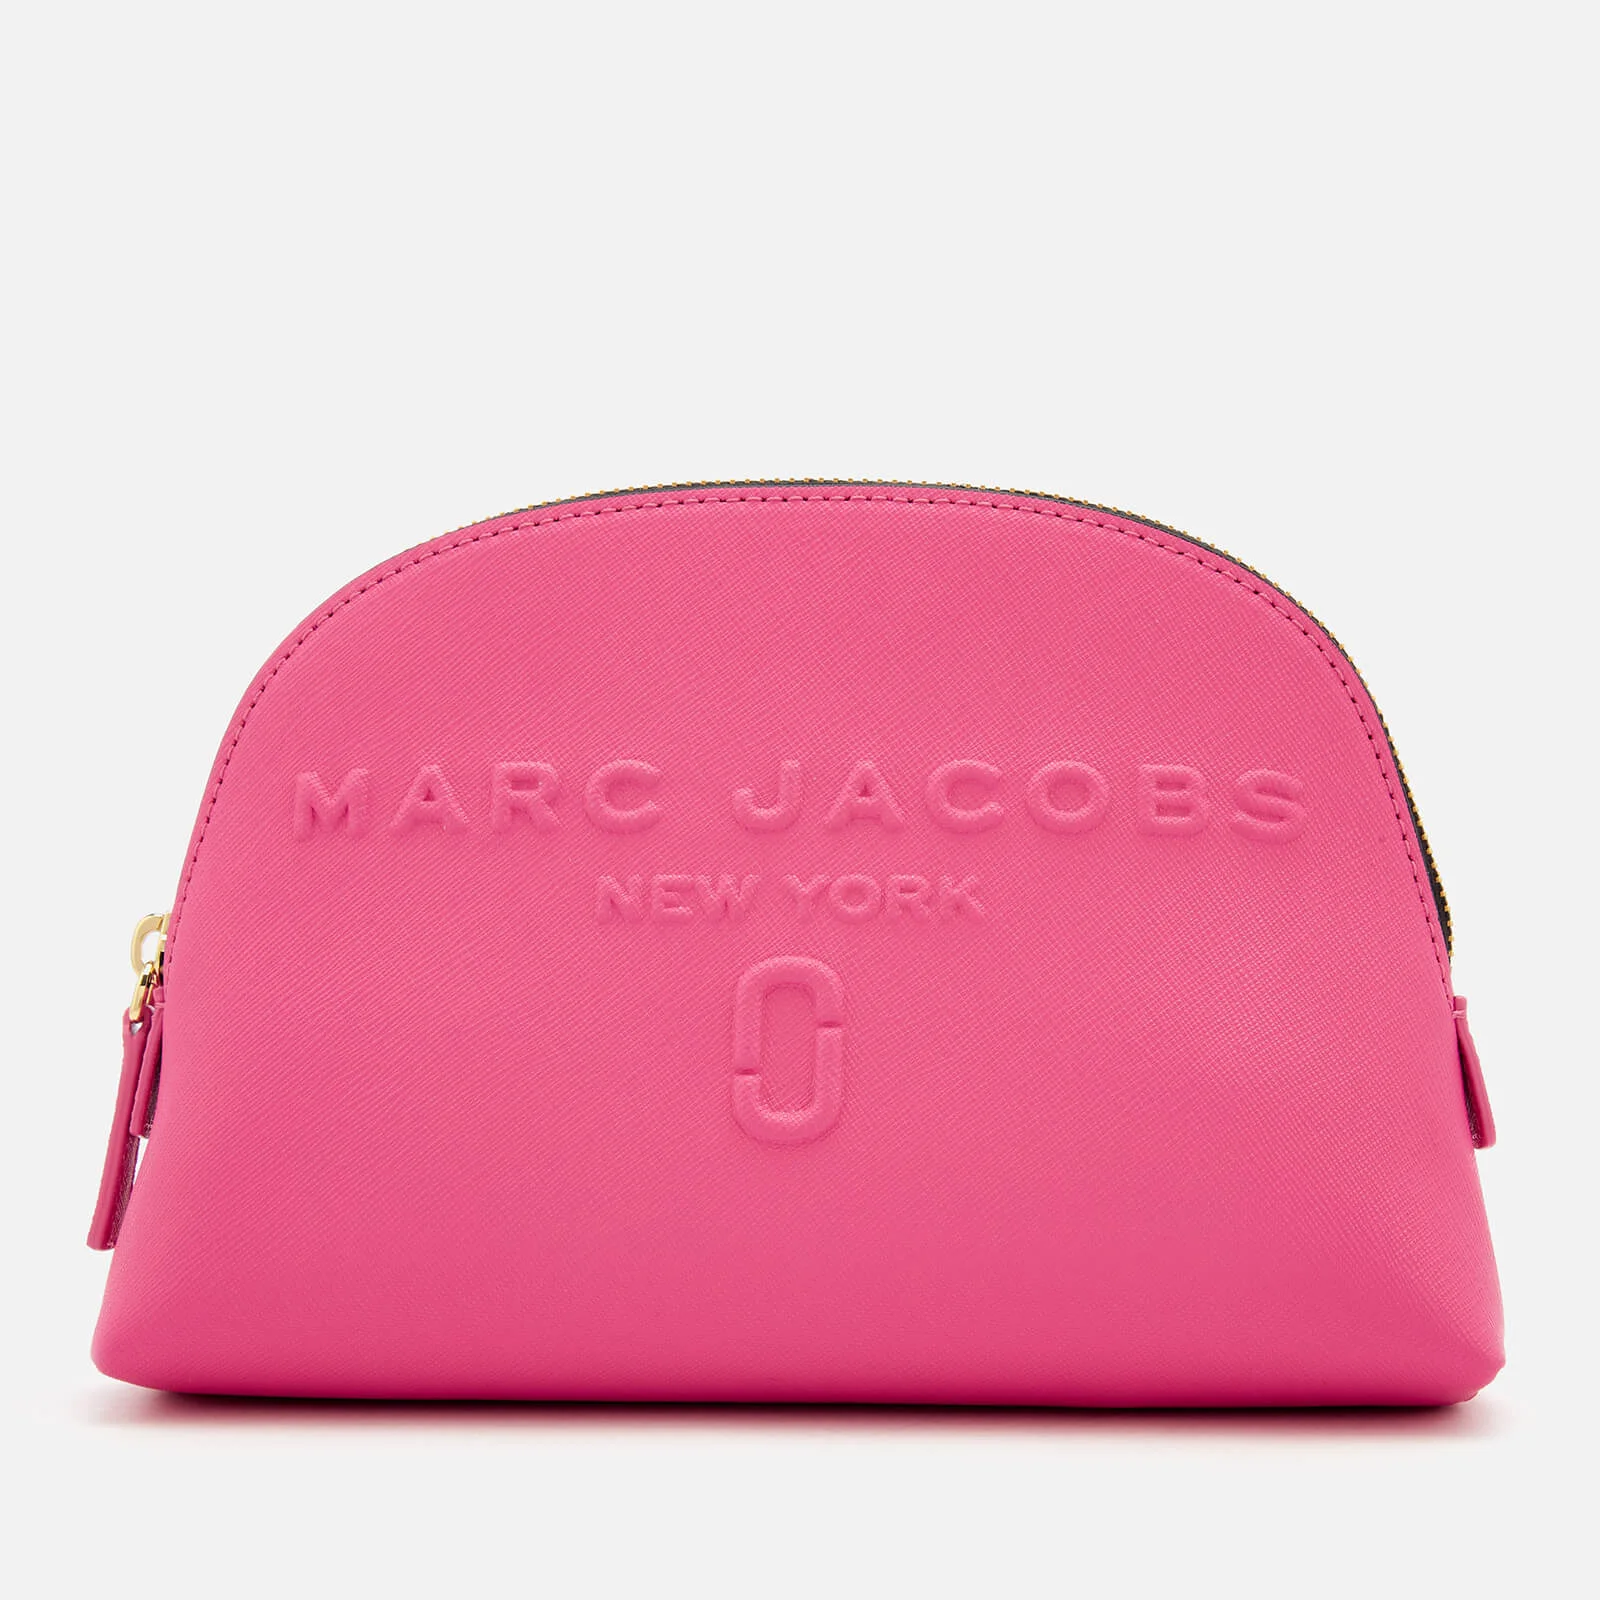 Marc Jacobs Women's Logo Dome Cosmetic Bag - Vivid Pink Image 1